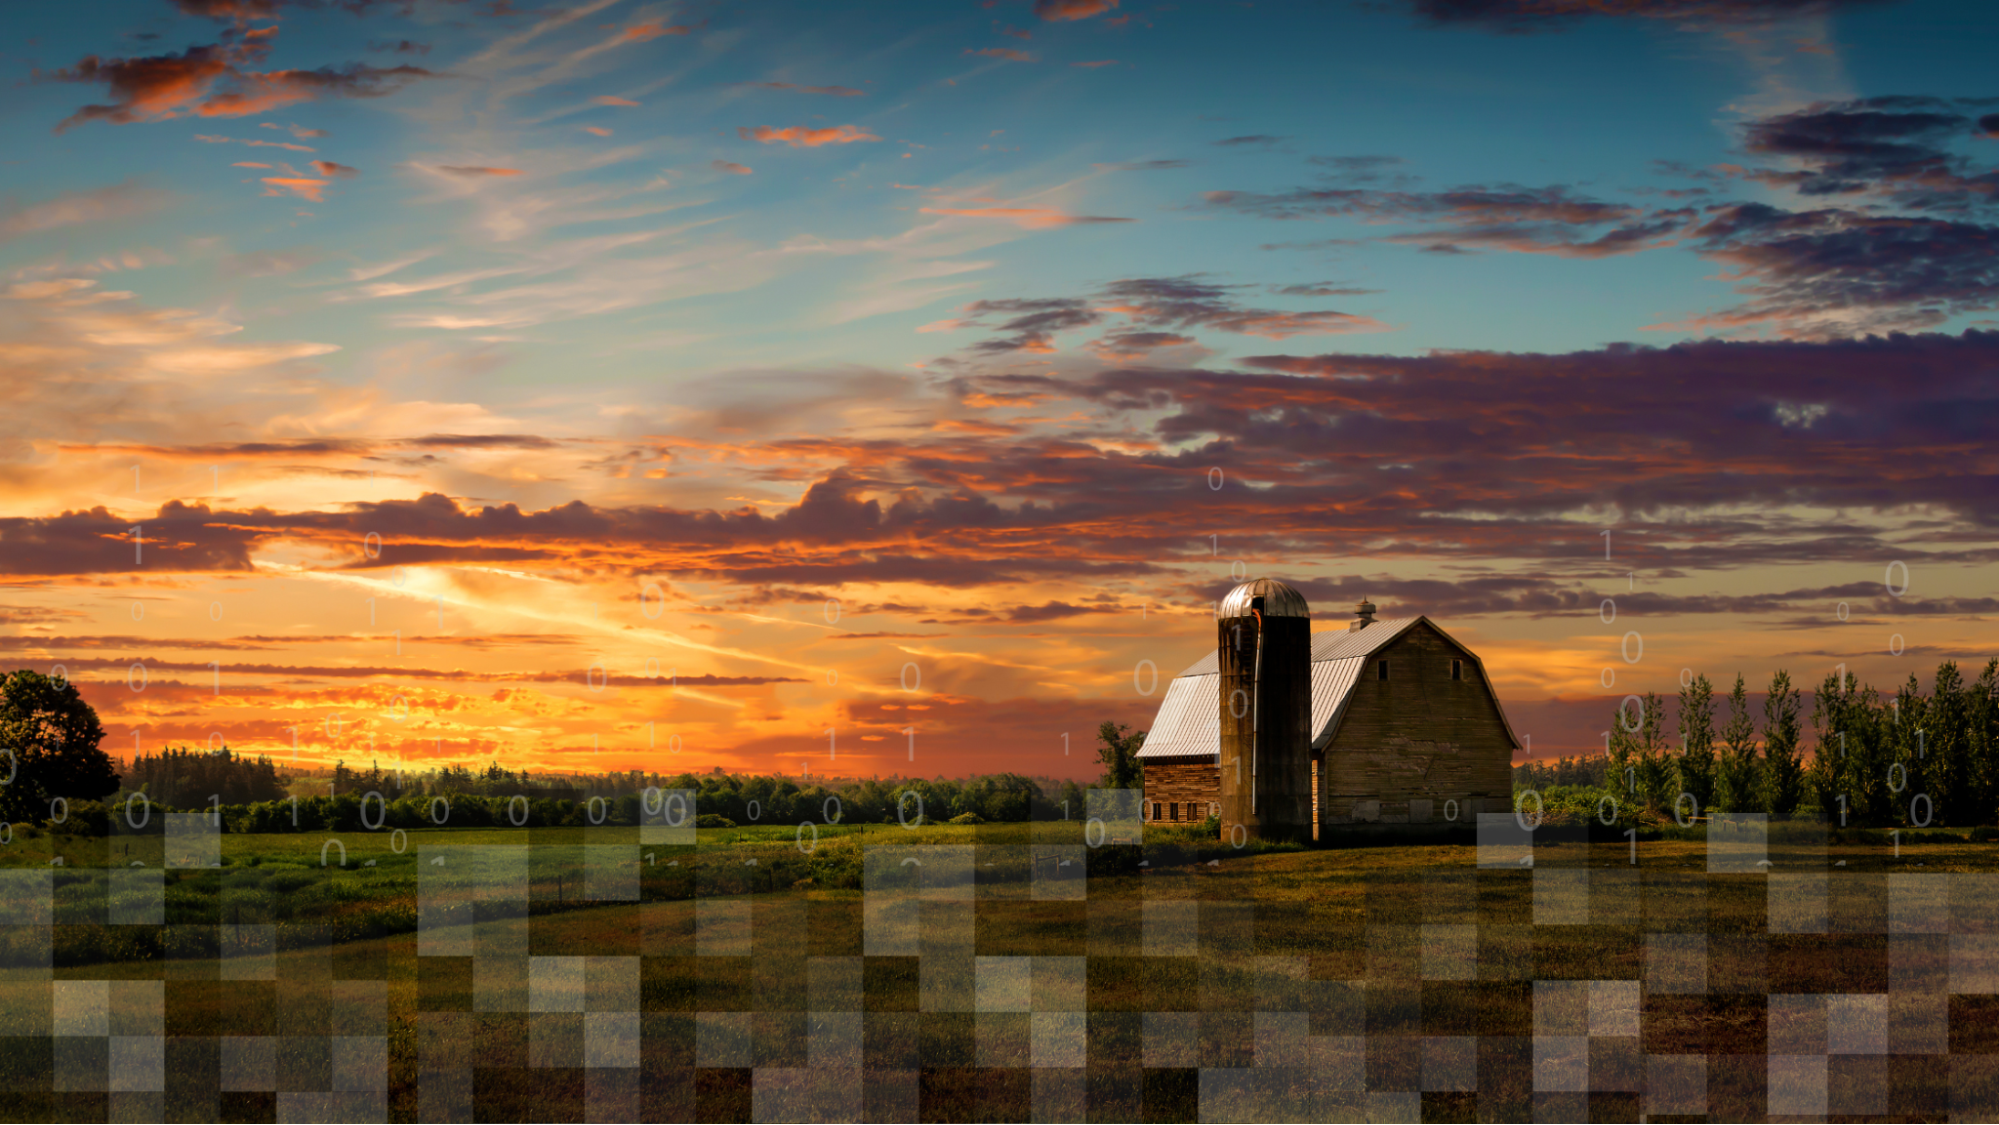 A sunset image of a barn on a green agricultural field